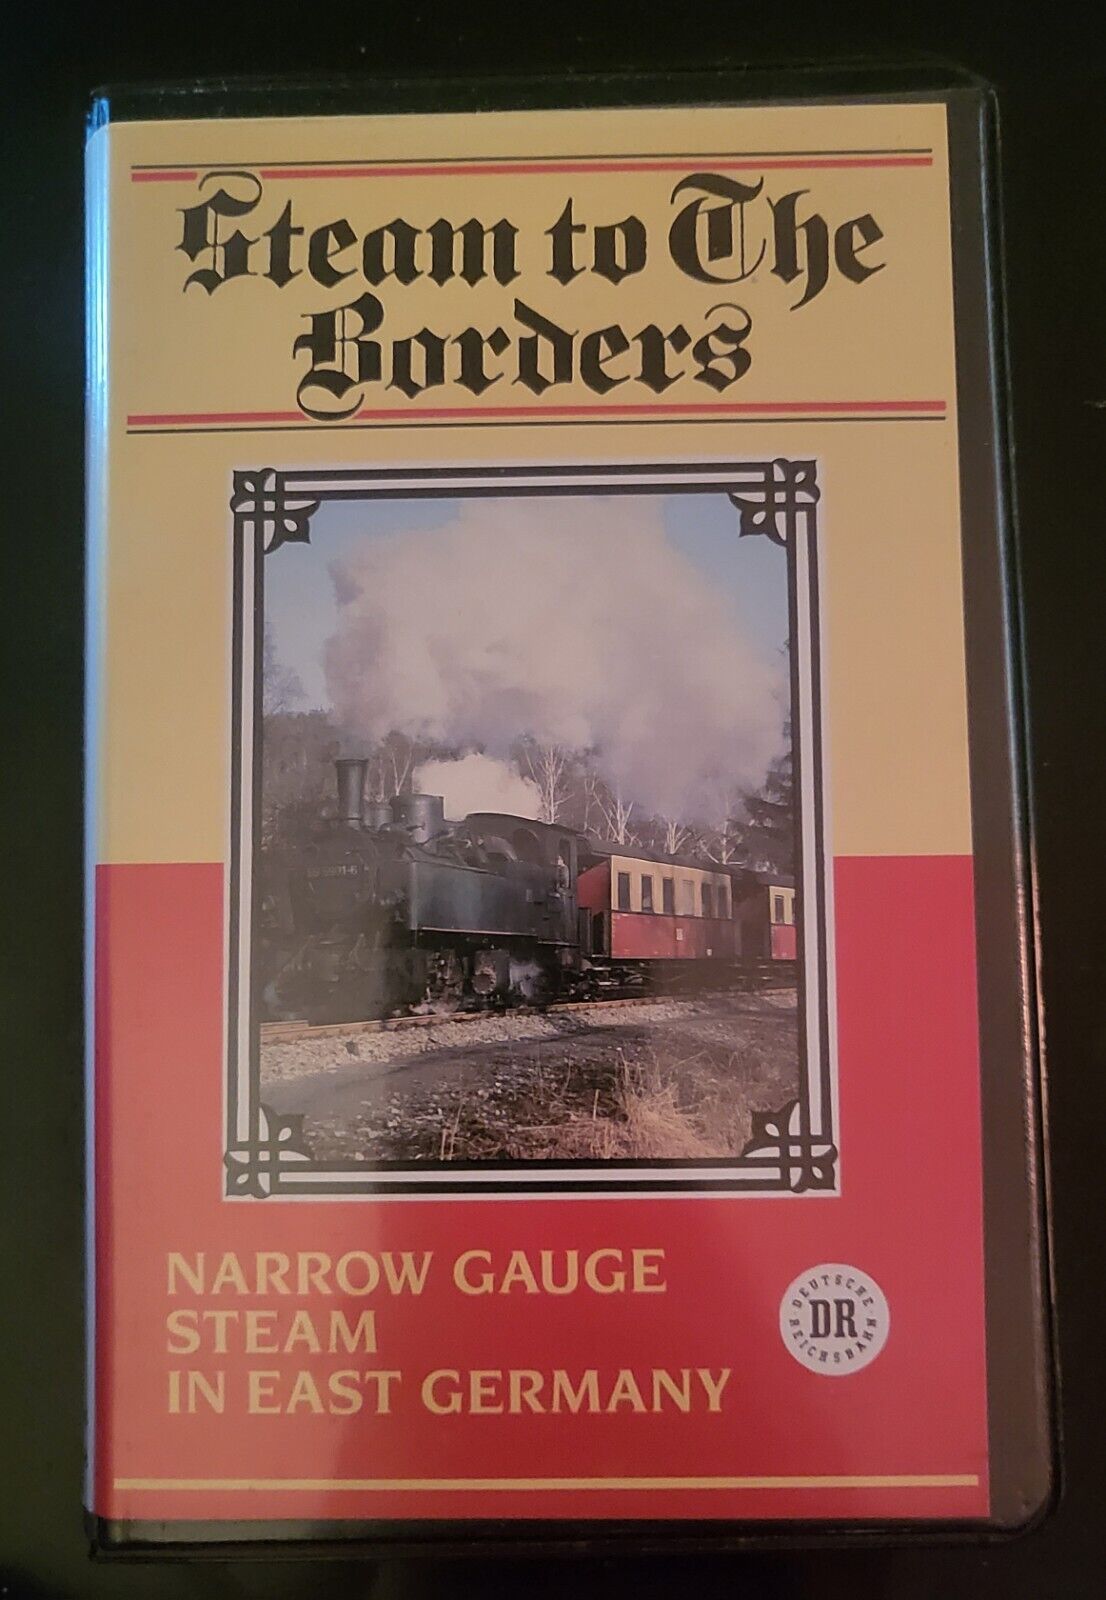 Steam to the borders Railfilms England Narrow Guage steam in East Germany VHS